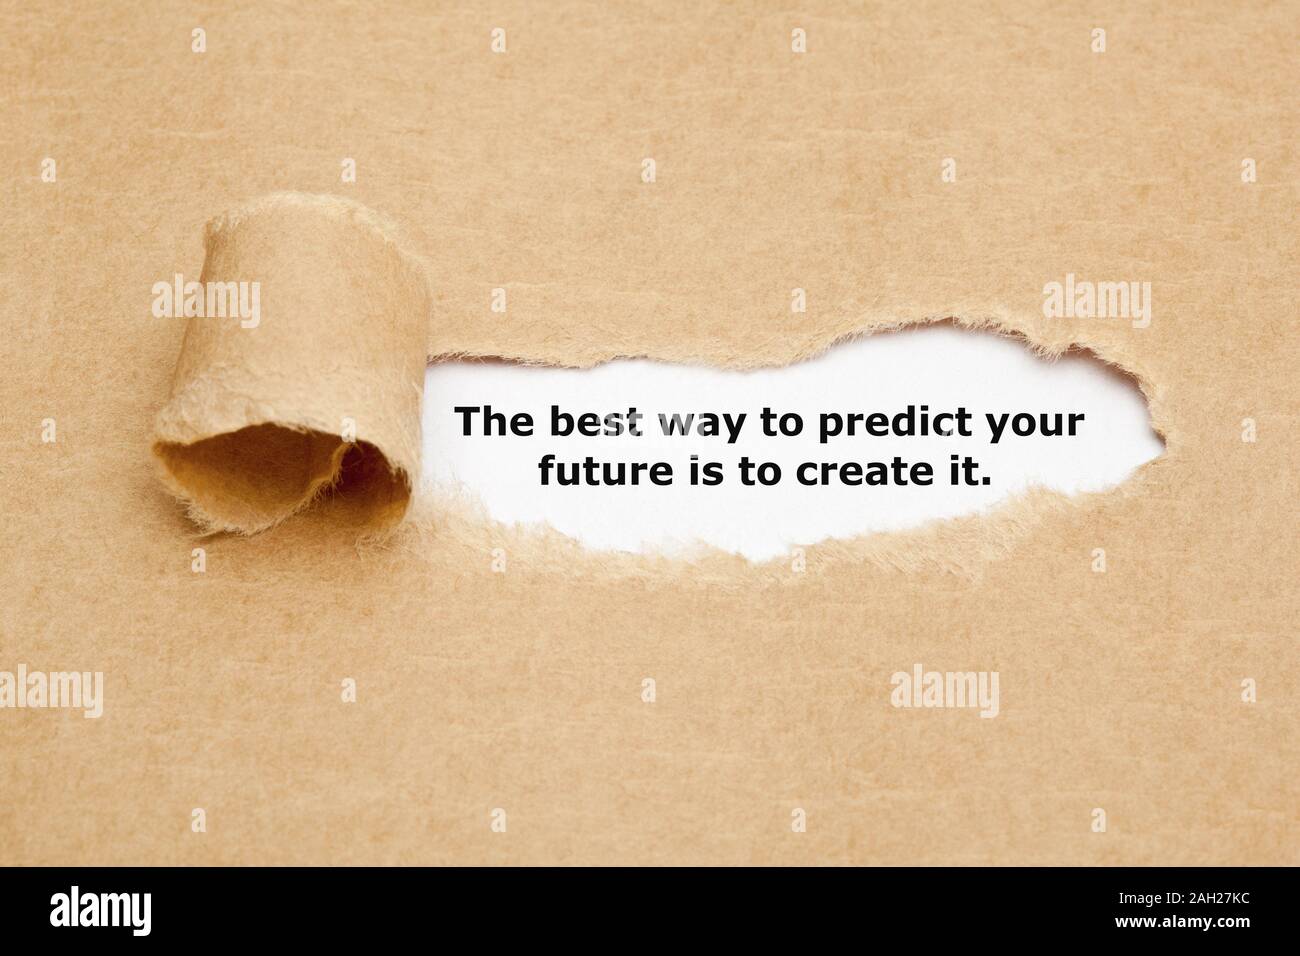 Inspirational quote The best way to predict your future is to create it. appearing behind torn brown paper. Stock Photo